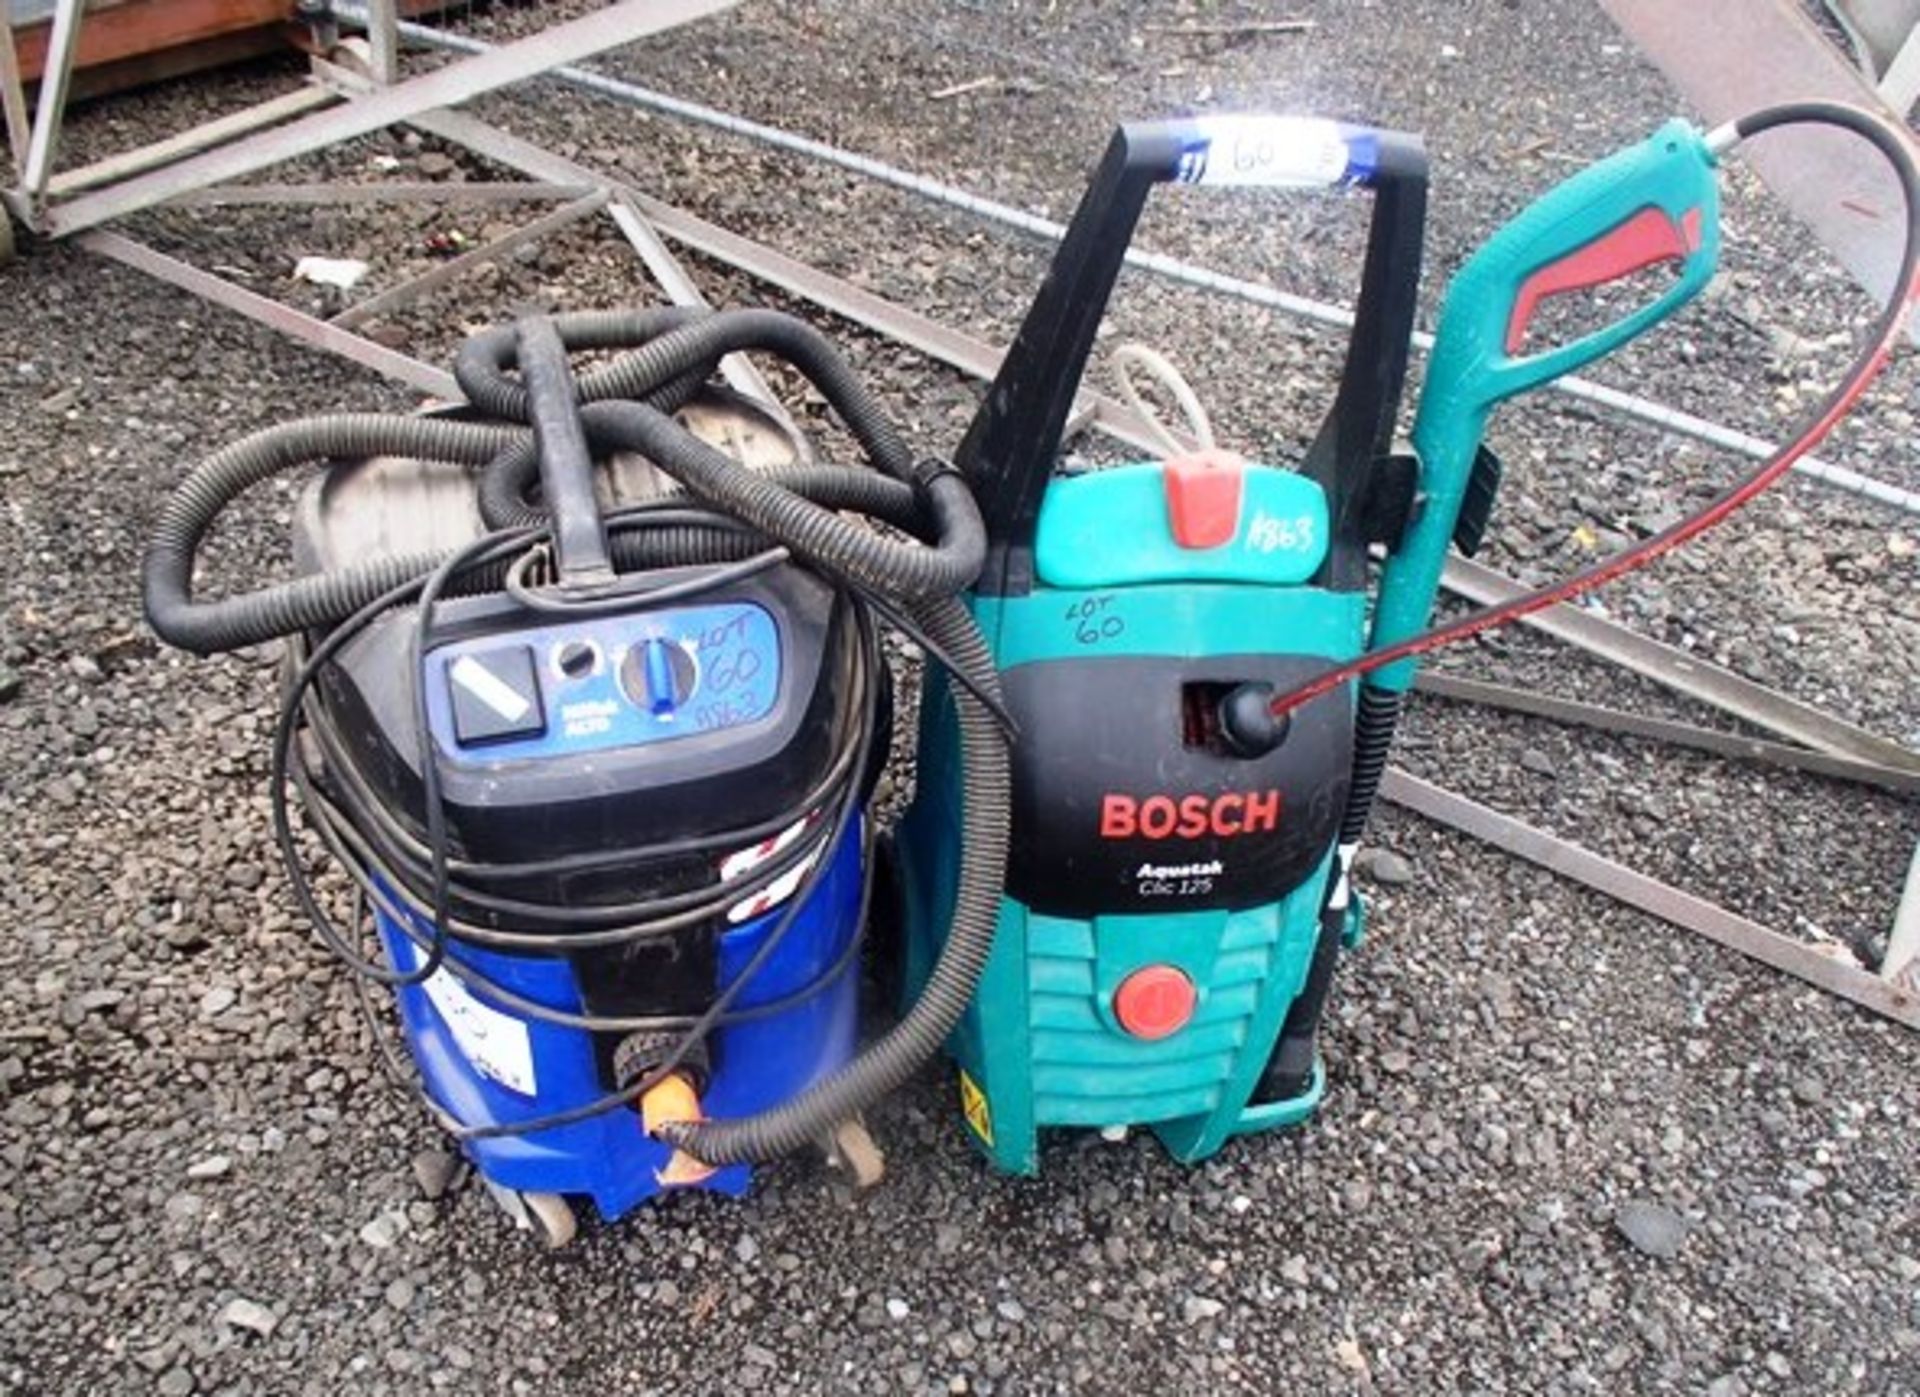 BOSCH AQUATIC PRESSURE WASHER ALONG WITH NILFISK INDUSTRIAL HOOVER**DIRECT FROM COUNCIL**